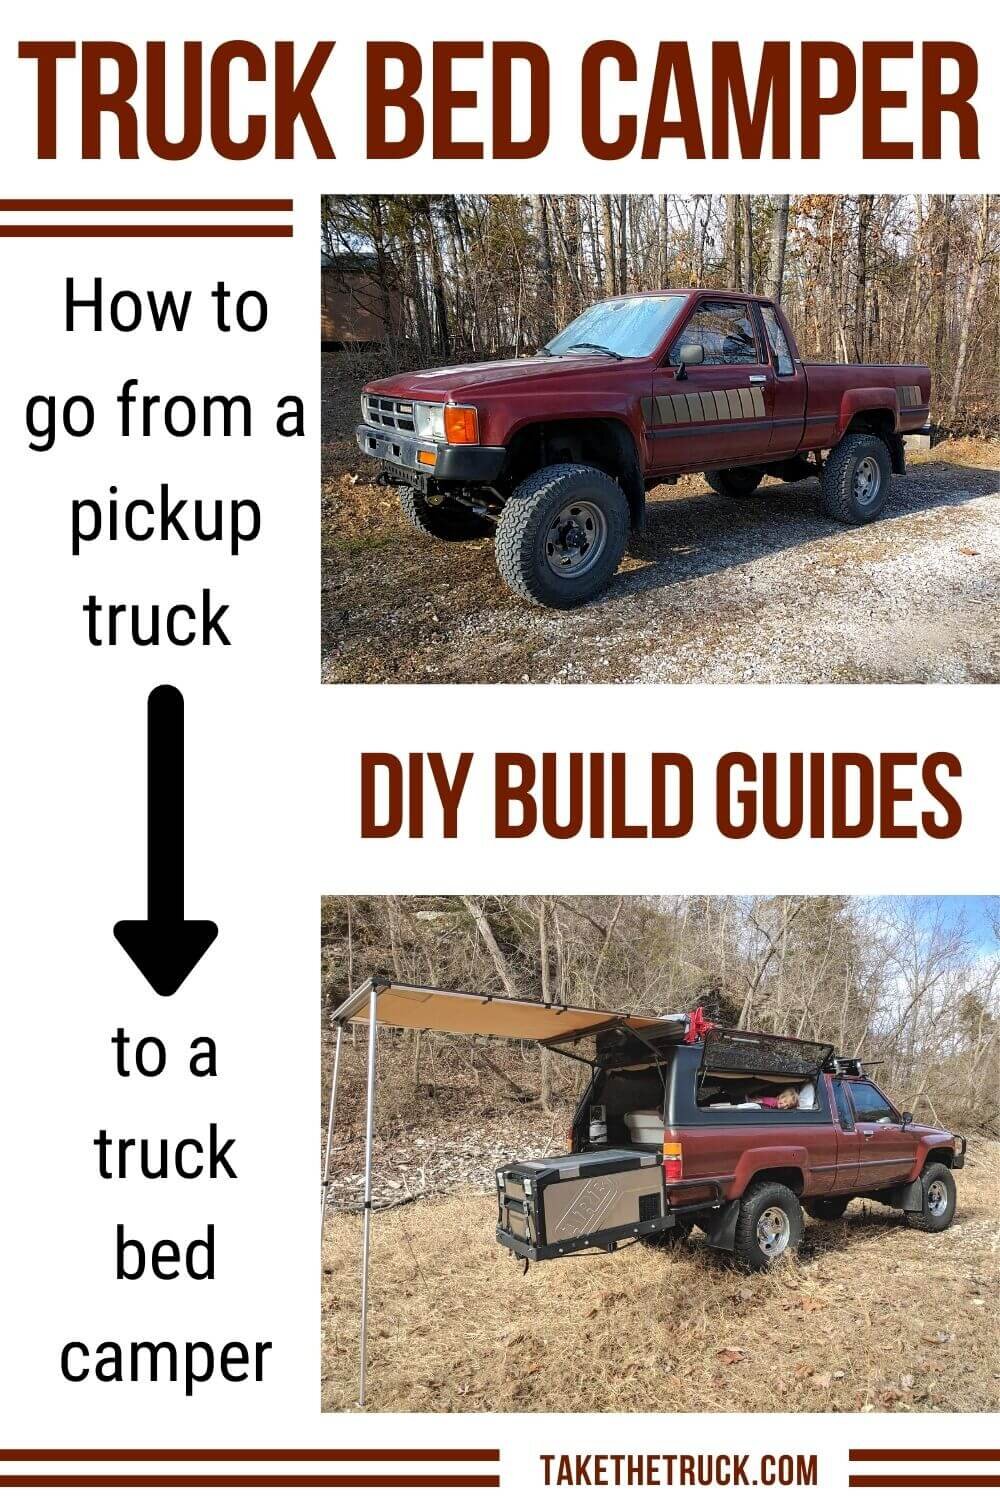 Lots of posts all about how to build a DIY truck camper and budget overland vehicle! From the truck bed camping sleeping platform to overlanding gear to the truck bed camping interior, it’s all here!